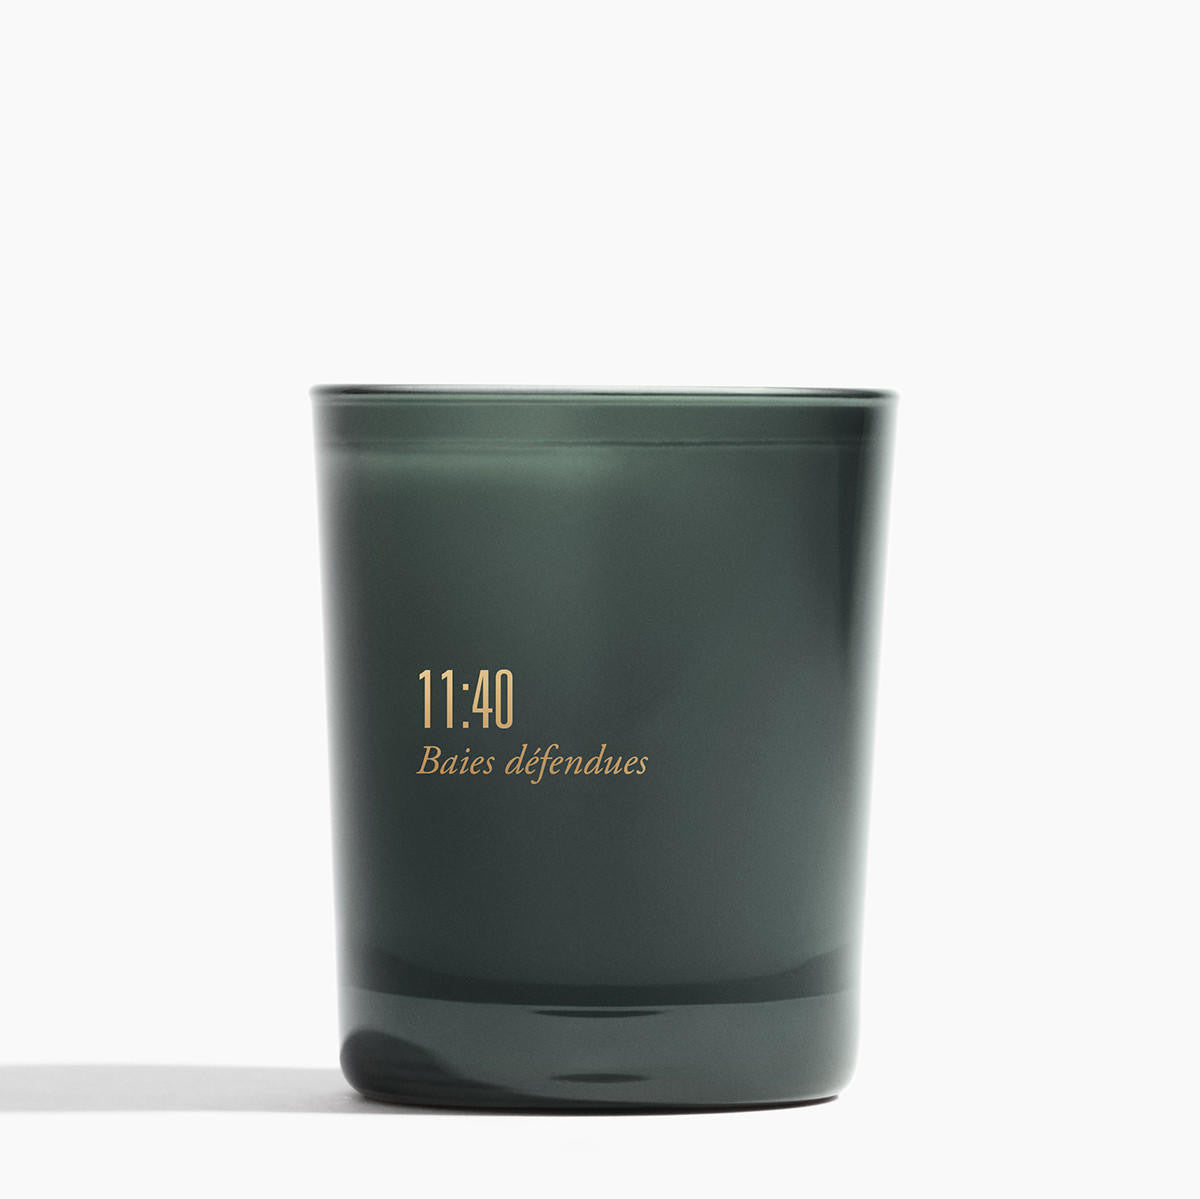  D'ORSAY 11:40  Baies défendues 190g Candle 